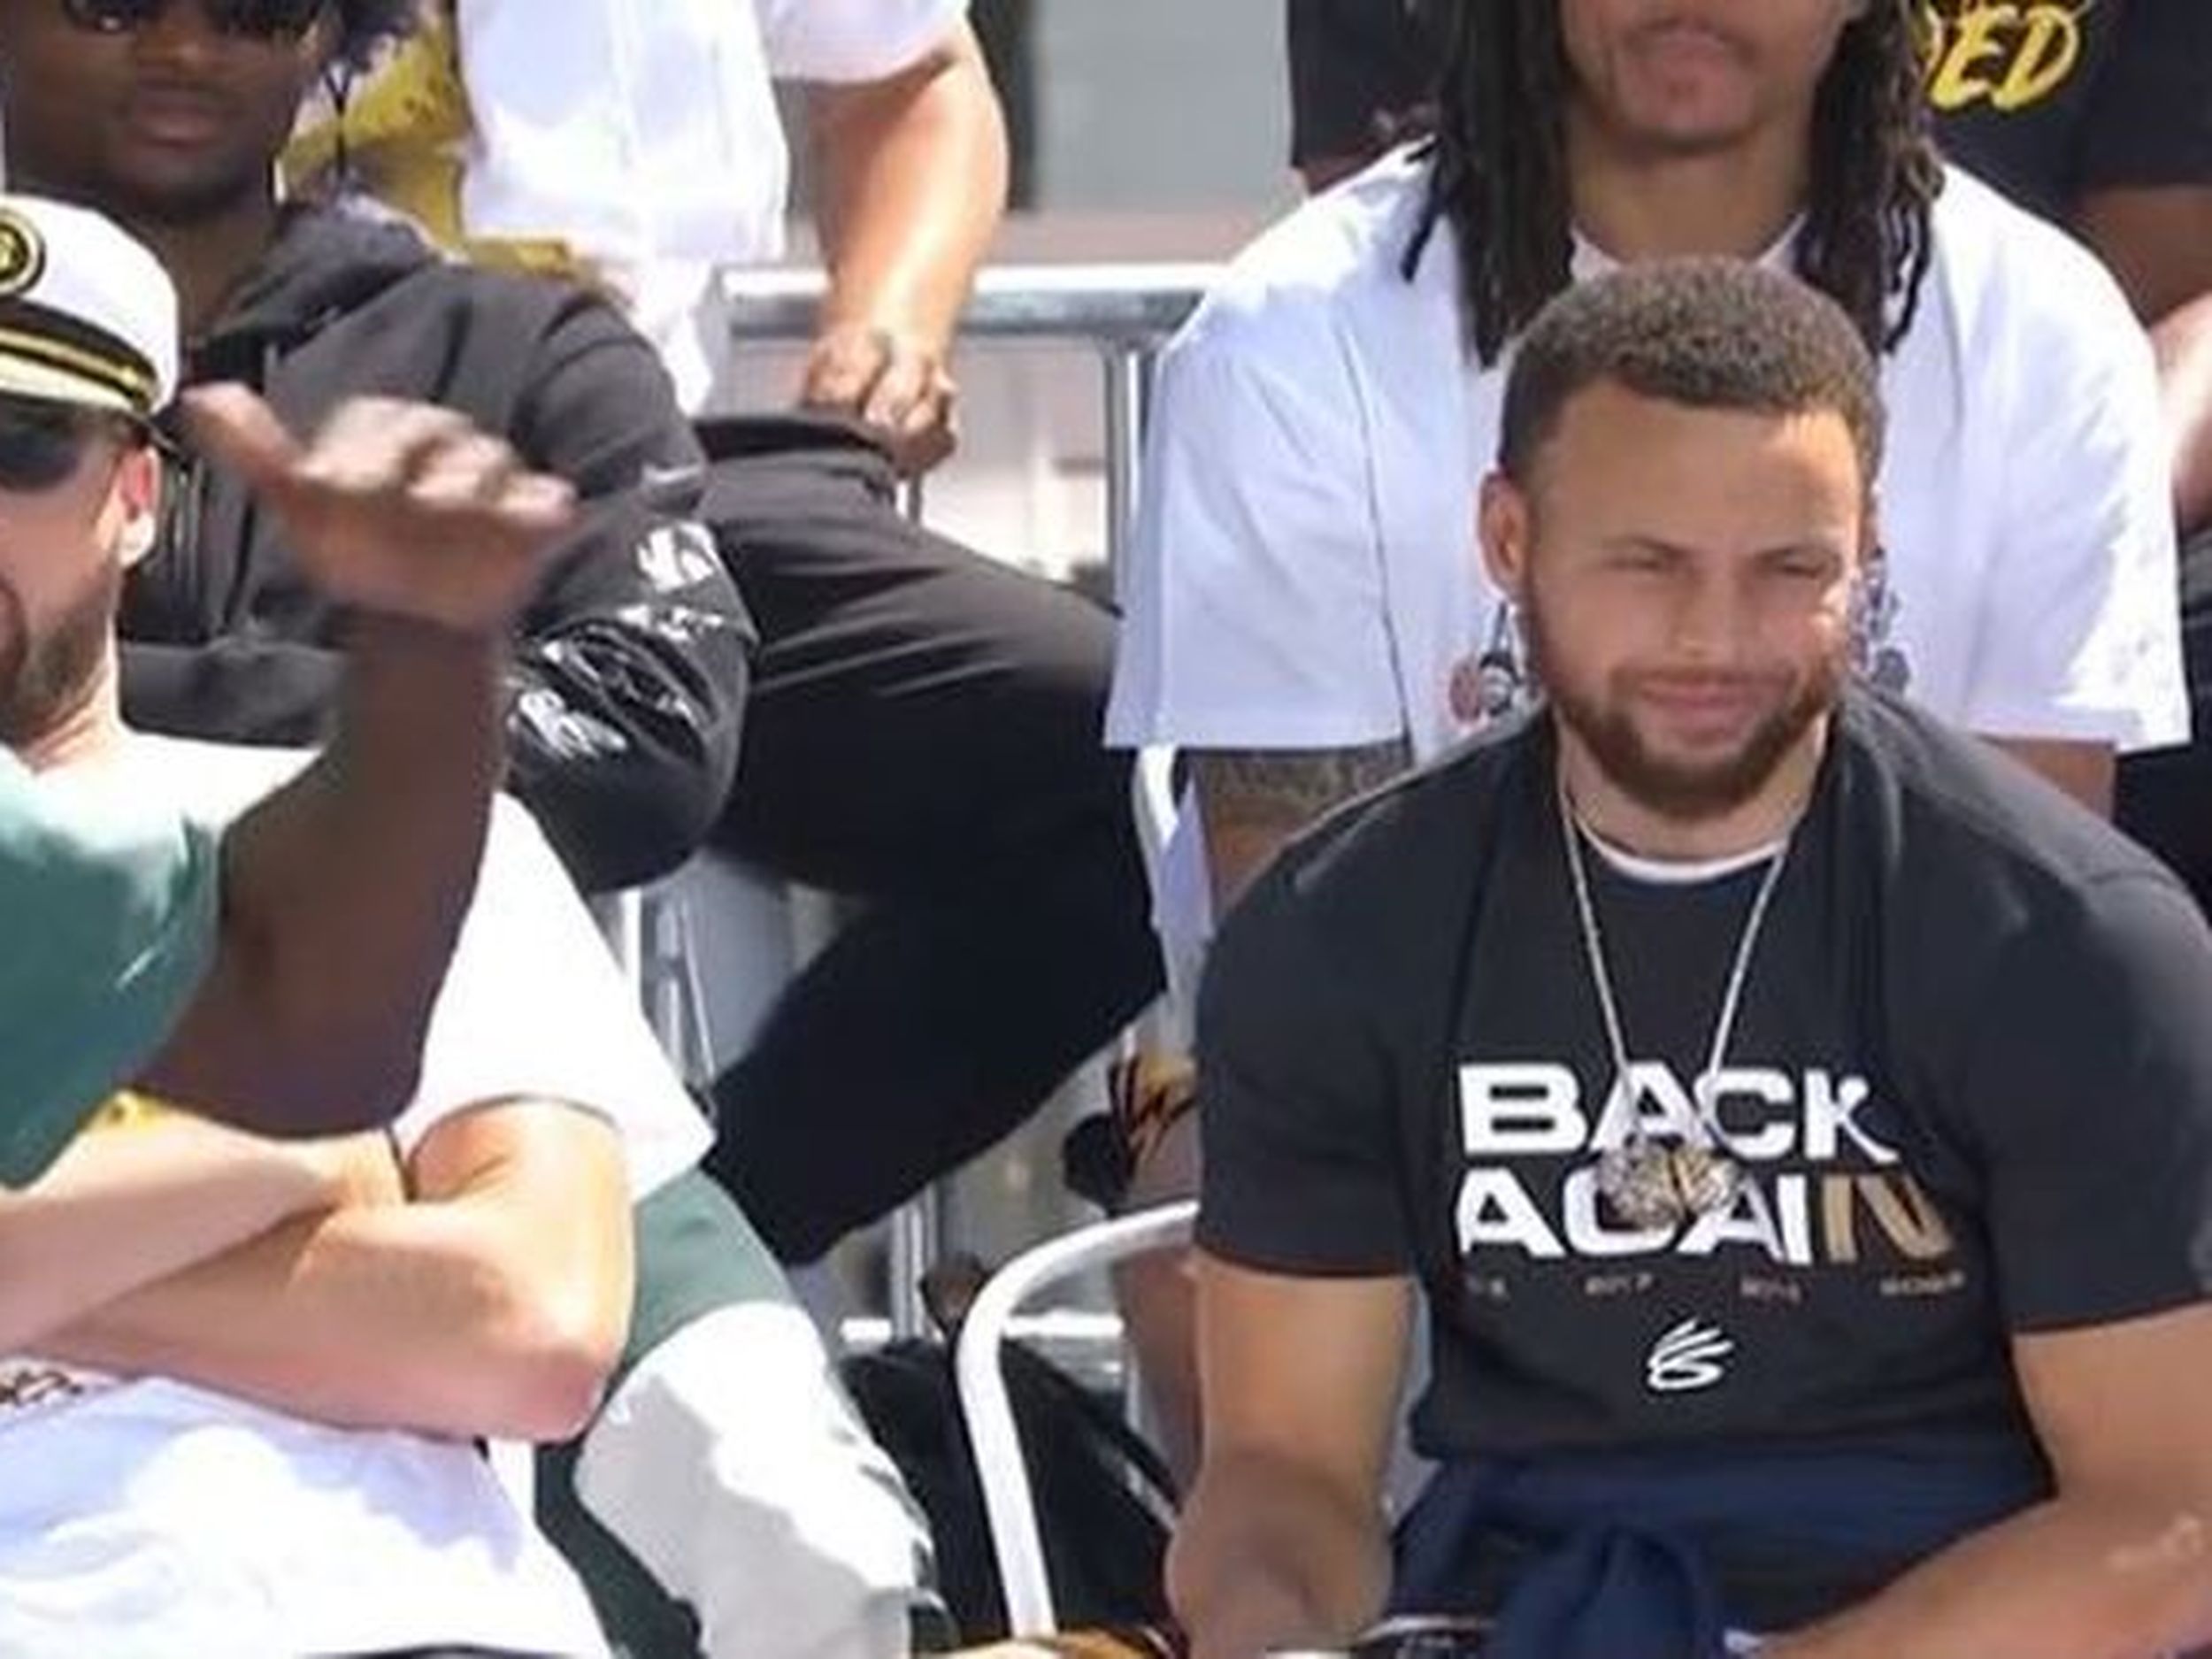 Captain Klay loses his championship cap while boating to the